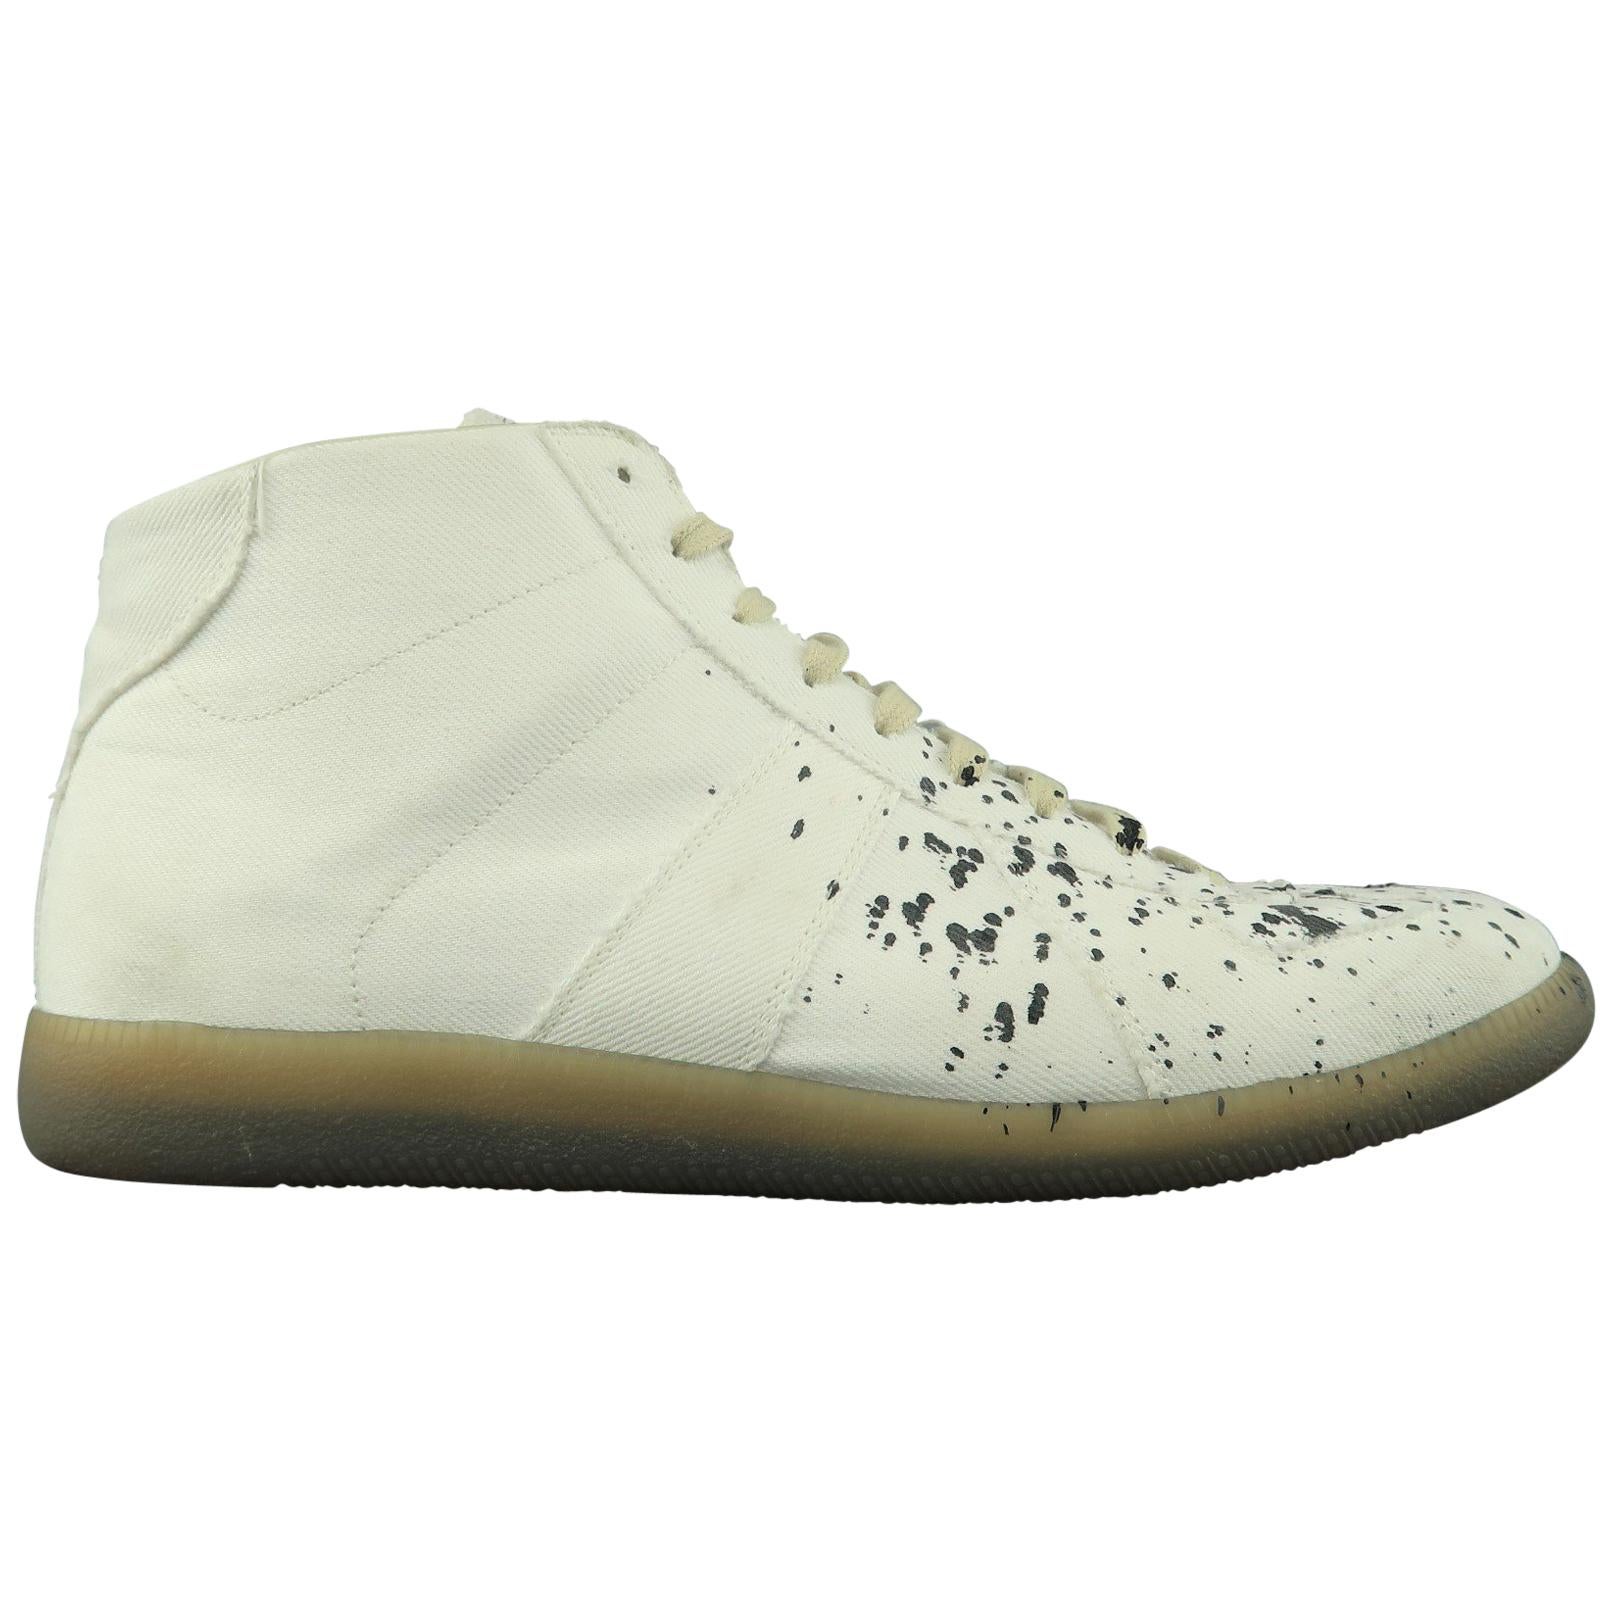 MAISON MARGIELA Size 11 White Ink Splattered Canvas High Top Trainer Sneakers